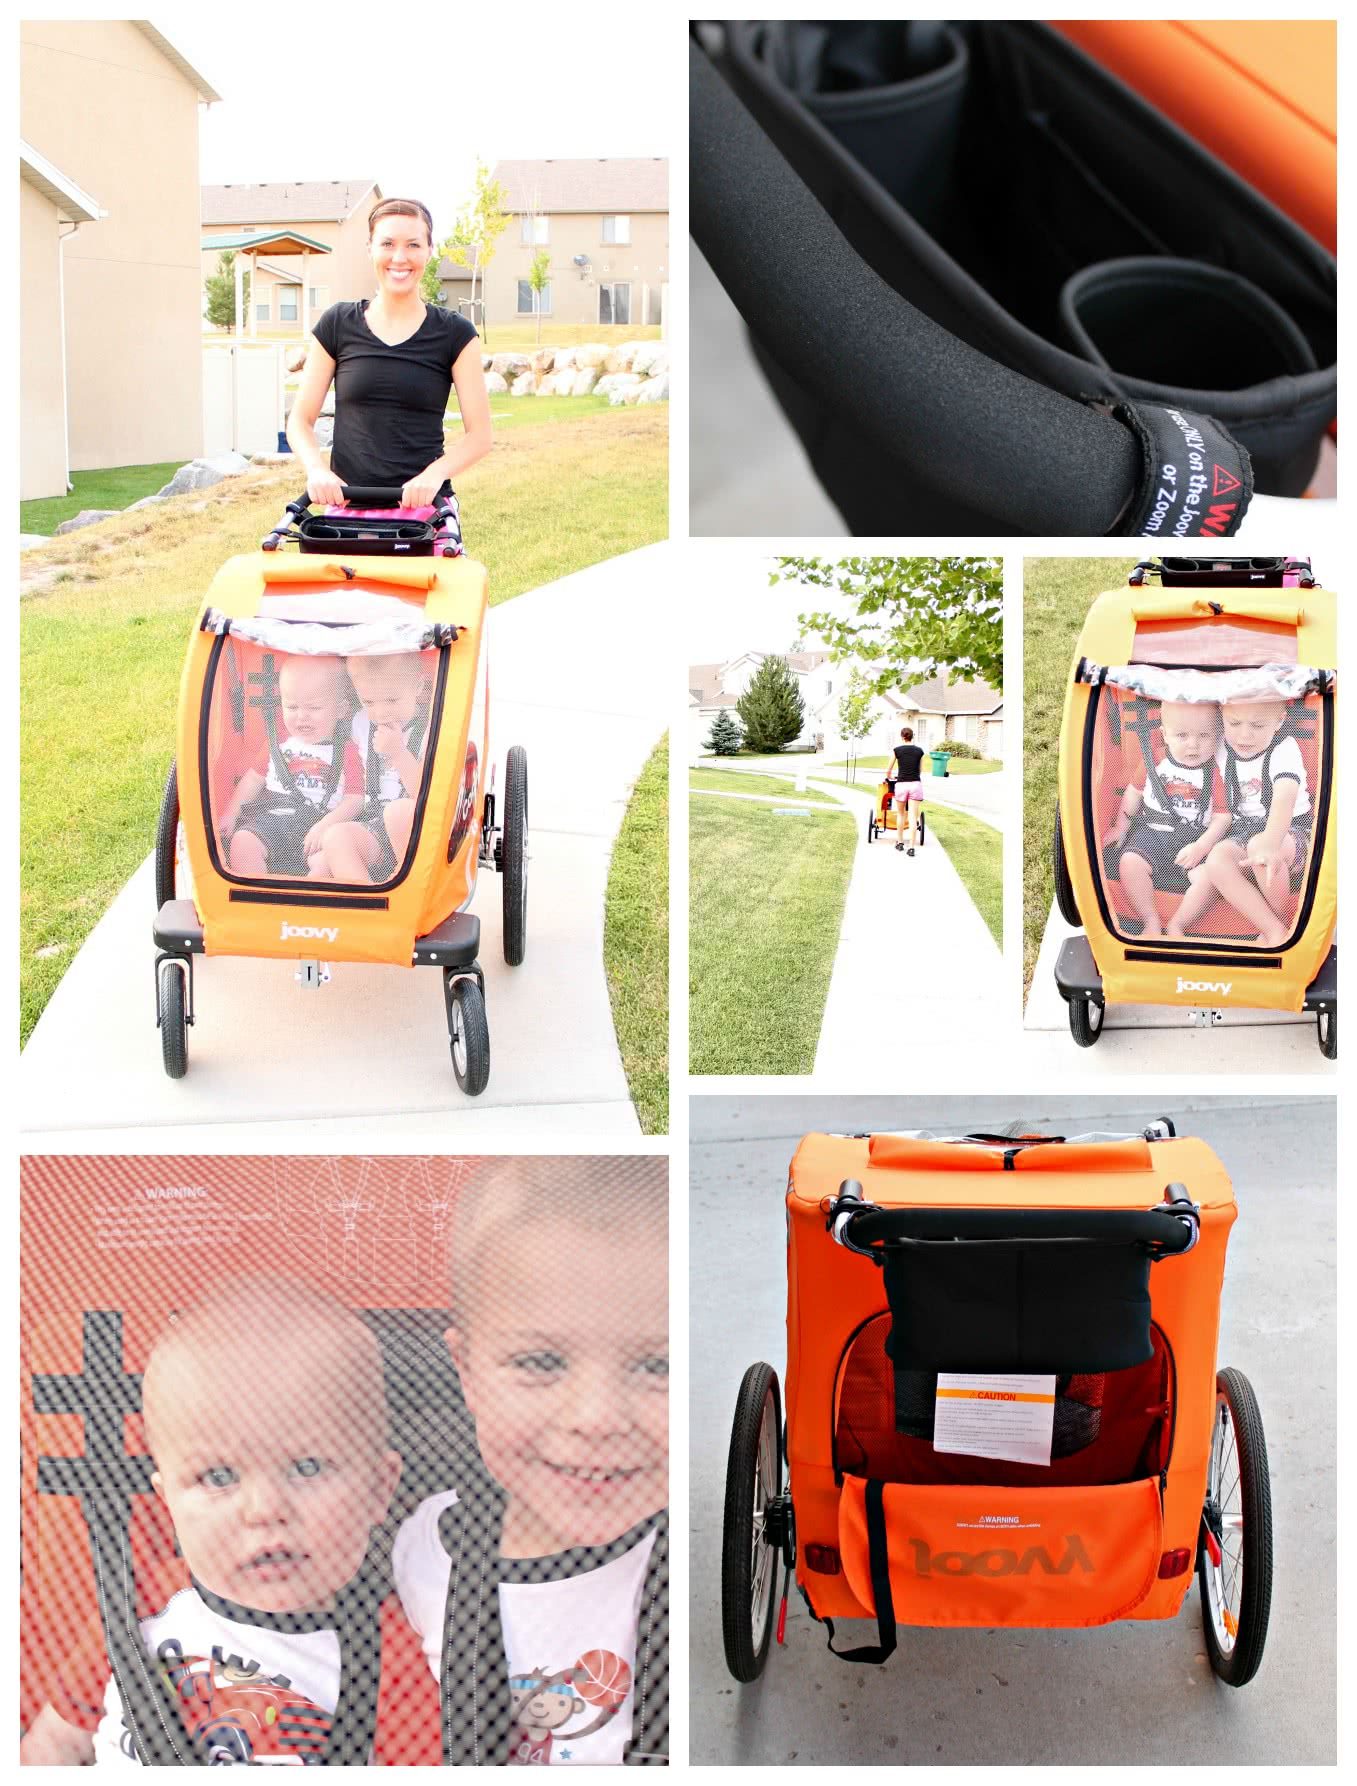 Joovy CocoonX2 Double Stroller Review